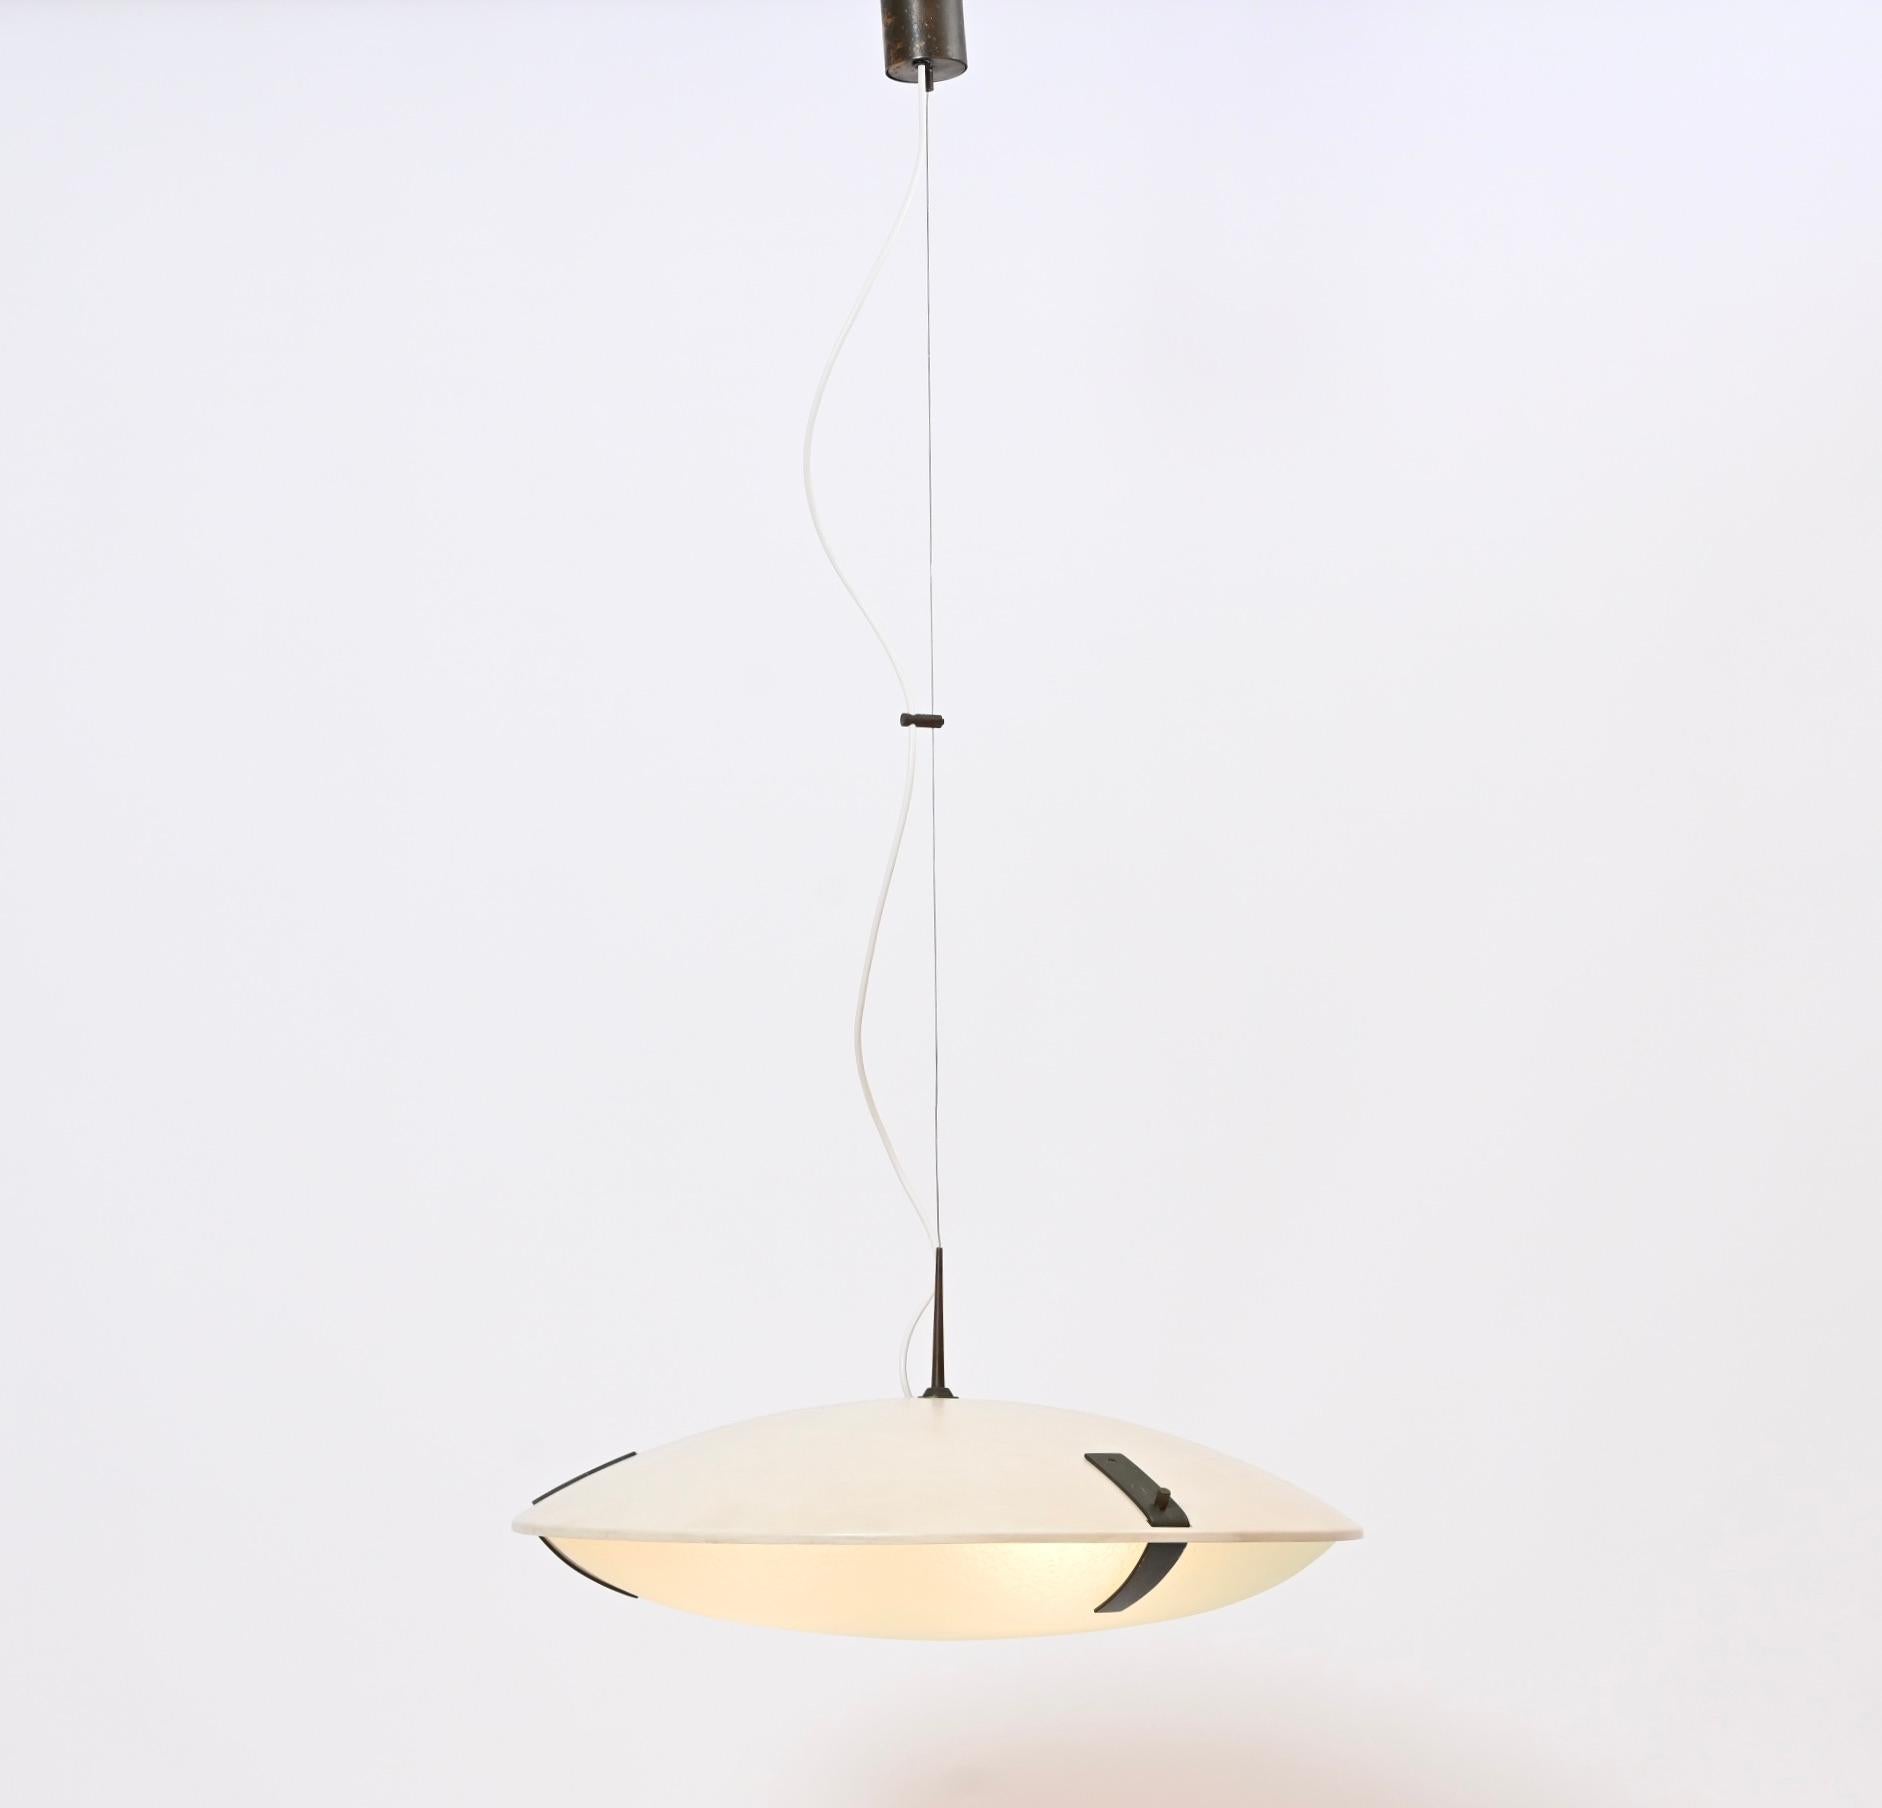 This 1960s Italian ceiling light, model ‘1140’, was designed and produced by Bruno Gatta’s Milanese company, Stilnovo, The height adjustable wire-suspended pendant comprises of a cream painted-steel dome and a decorative acid-etched glass diffuser